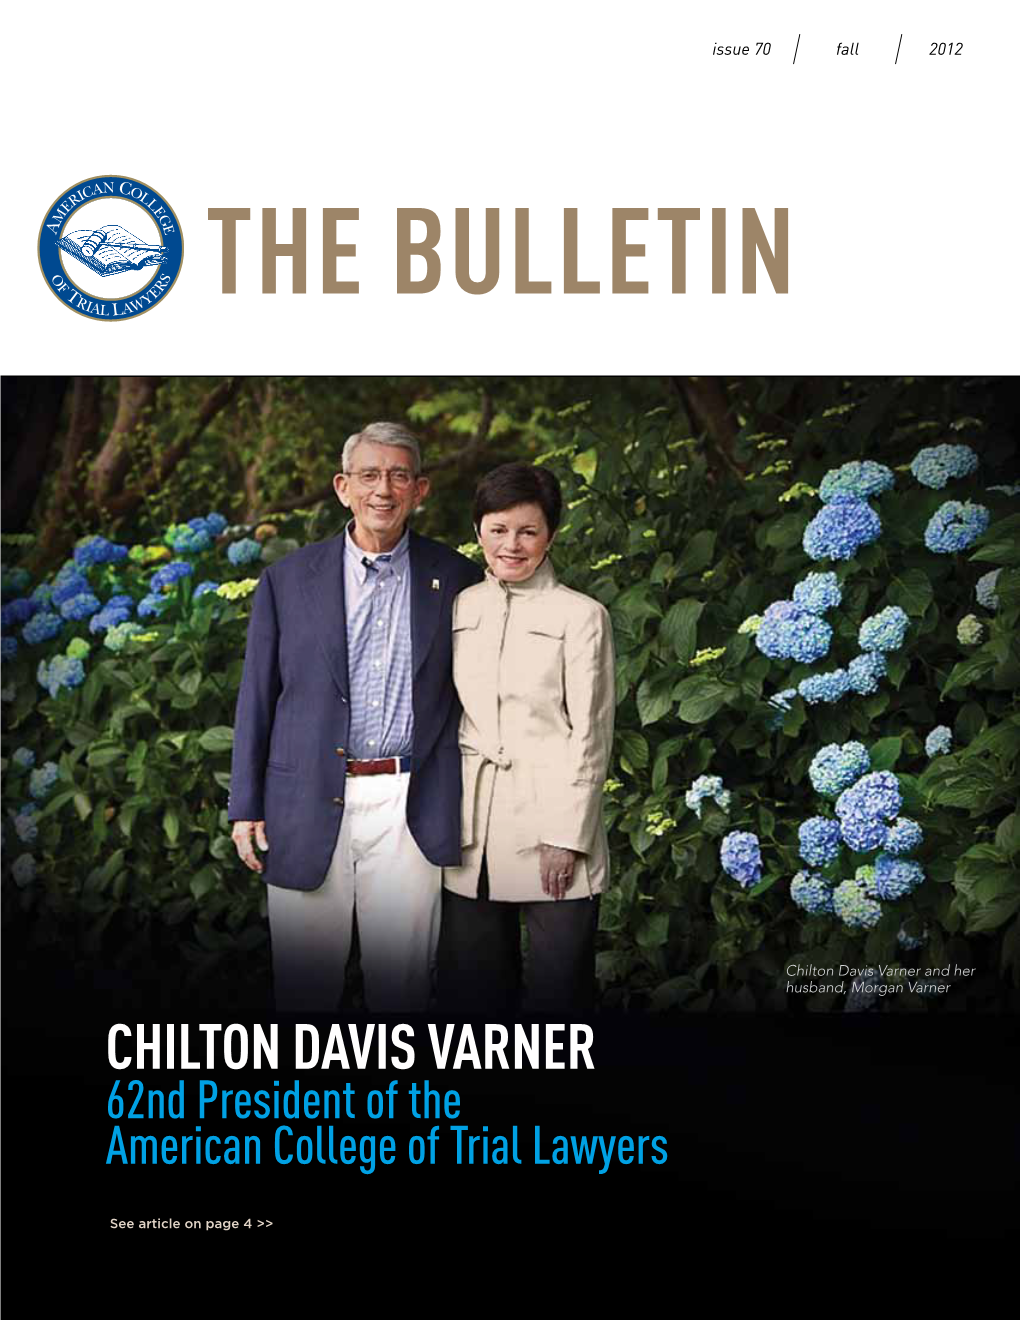 Chilton Davis Varner and Her Husband, Morgan Varner CHILTON DAVIS VARNER 62Nd President of the American College of Trial Lawyers